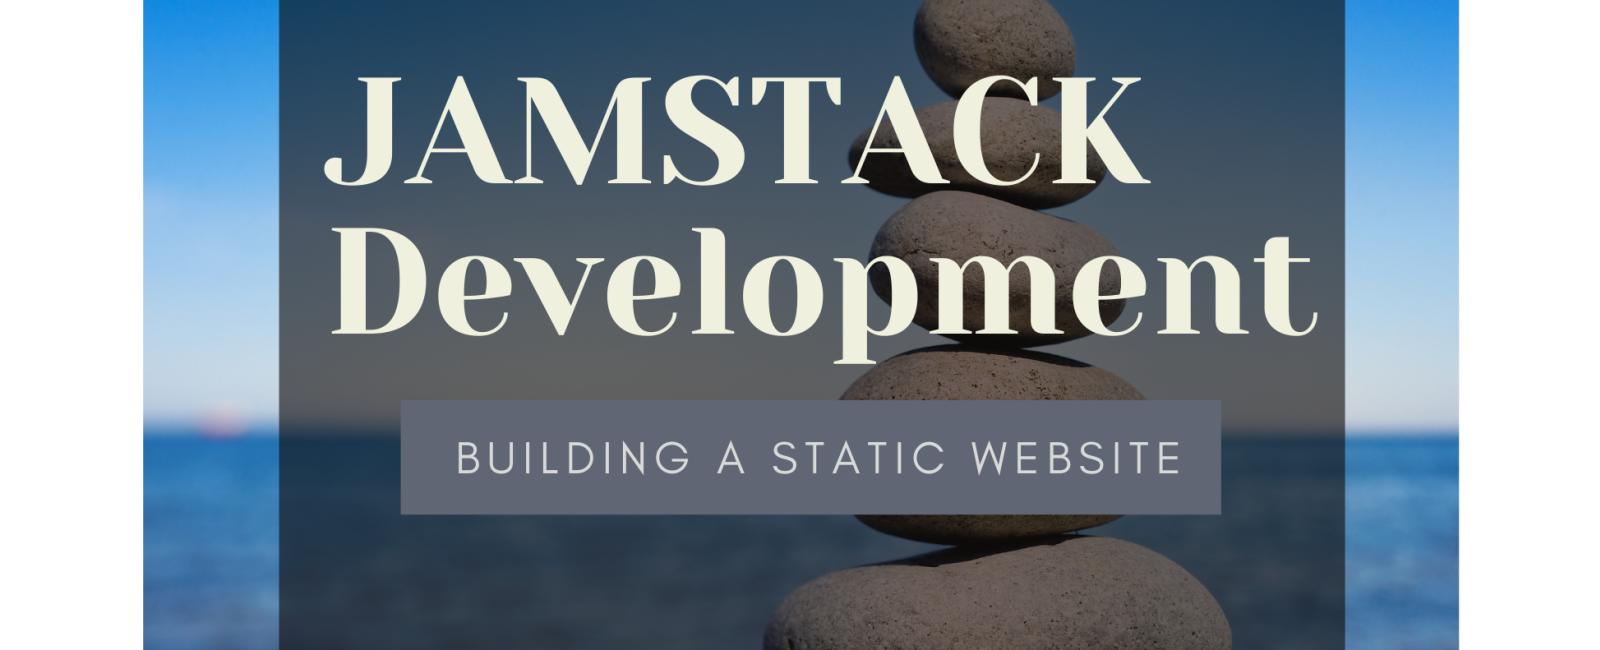 Building your first JAMStack website with AWS Amplify, Gatsby Starter, and Contentful